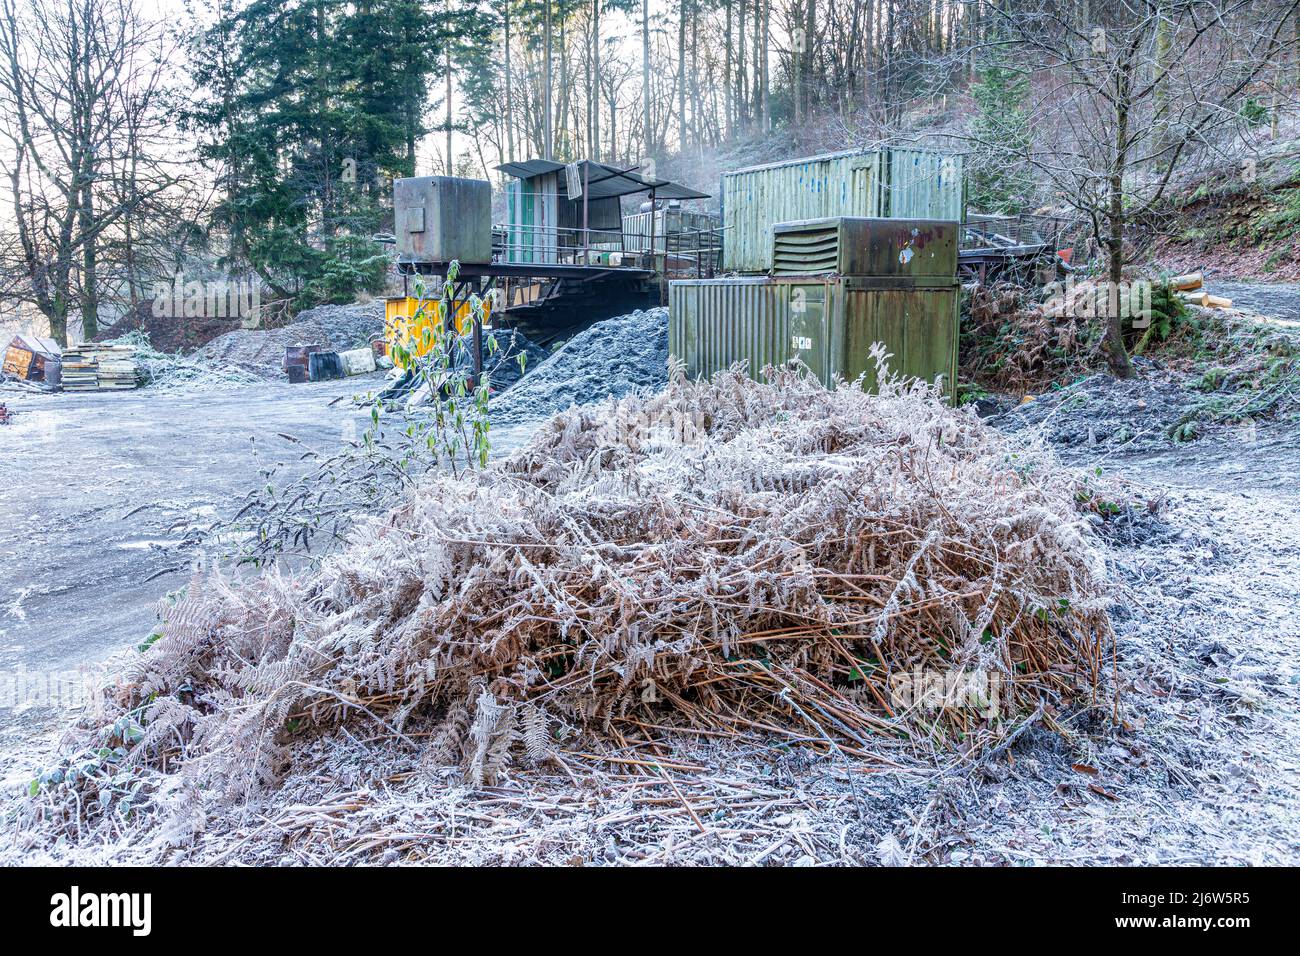 Winter in the Forest of Dean - Frost at Monument Pit, a freeminer coal mine at Bixslade, Gloucestershire, England UK Stock Photo